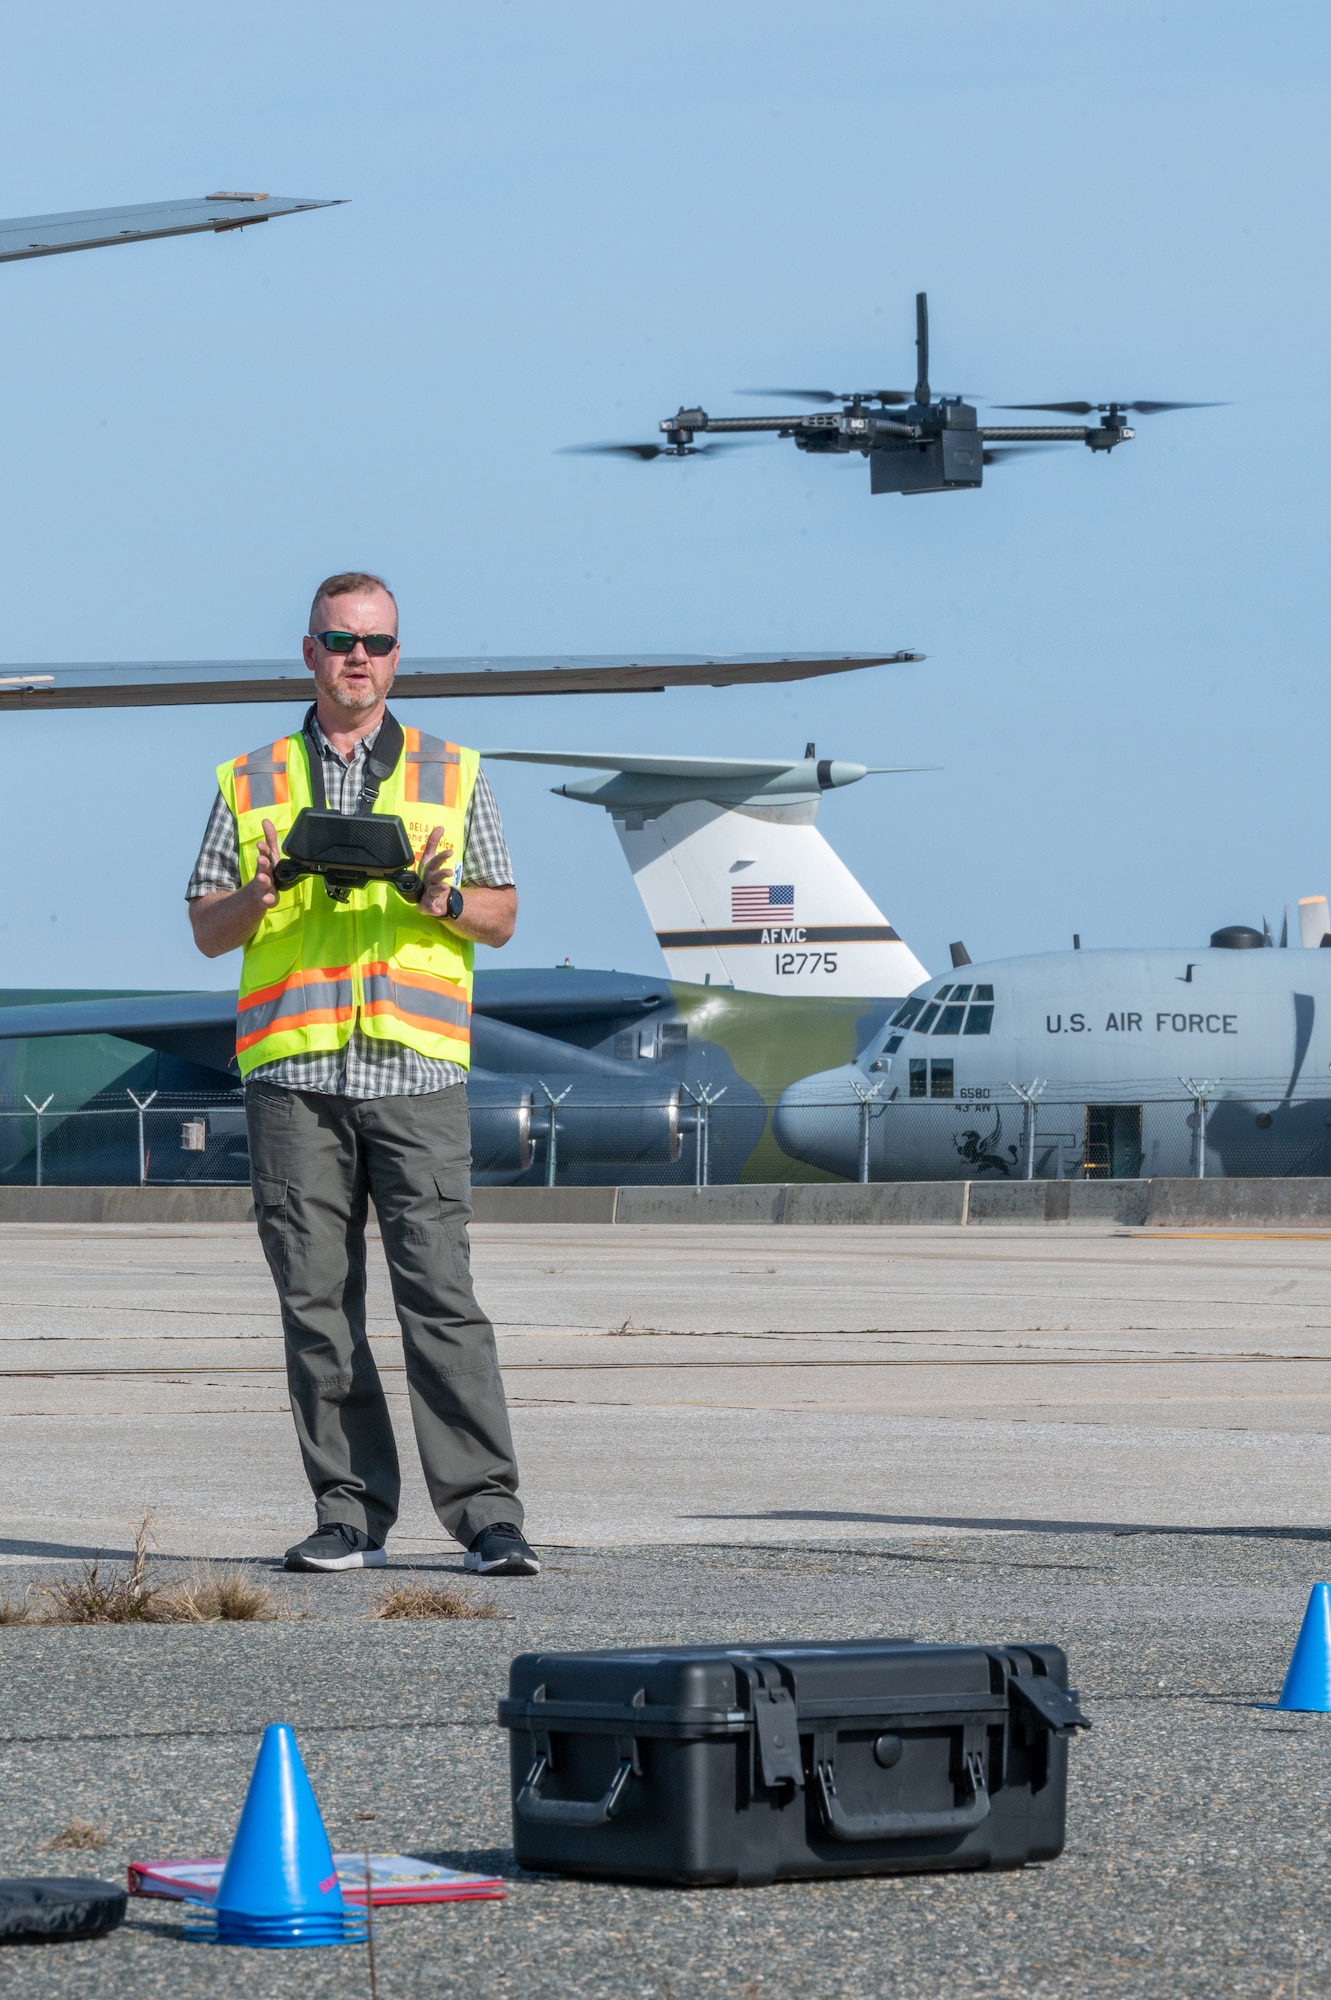 Ken Jones, 436th Mission Generation Group continuous process improvement manager, lands a Skydio X2D drone at Dover Air Force Base, Delaware, Nov. 4, 2022. This flight marked the first drone inspection of the structural integrity of a Dover AFB aircraft. (U.S. Air Force photo by Mauricio Campino)